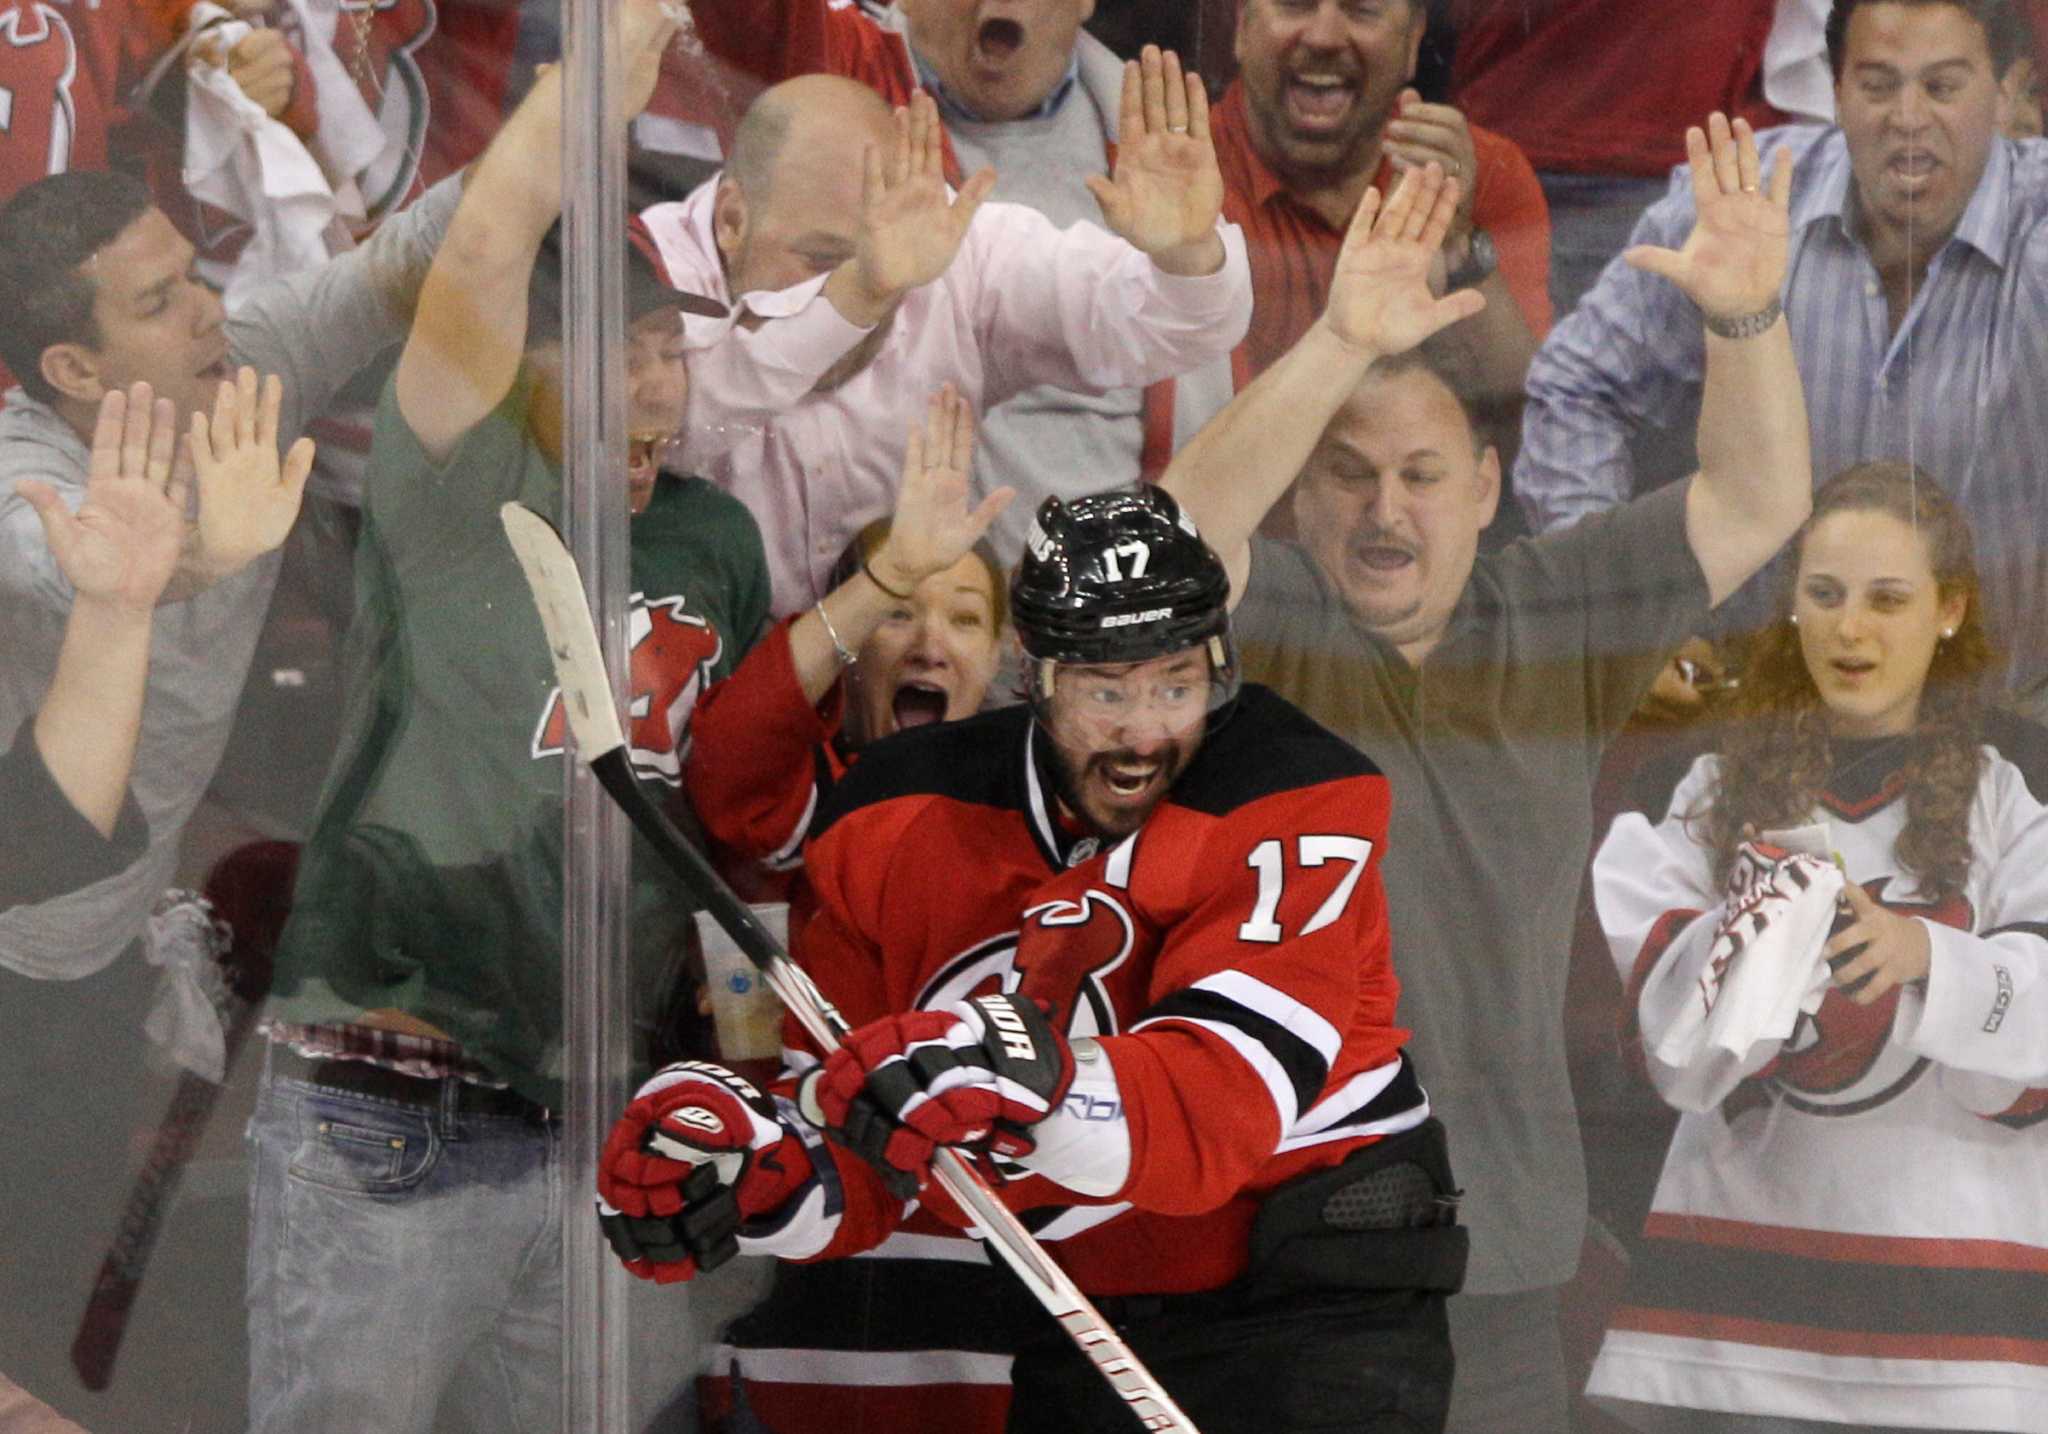 2012 Stanley Cup Playoffs: Henrique Does It Again in OT for Devils